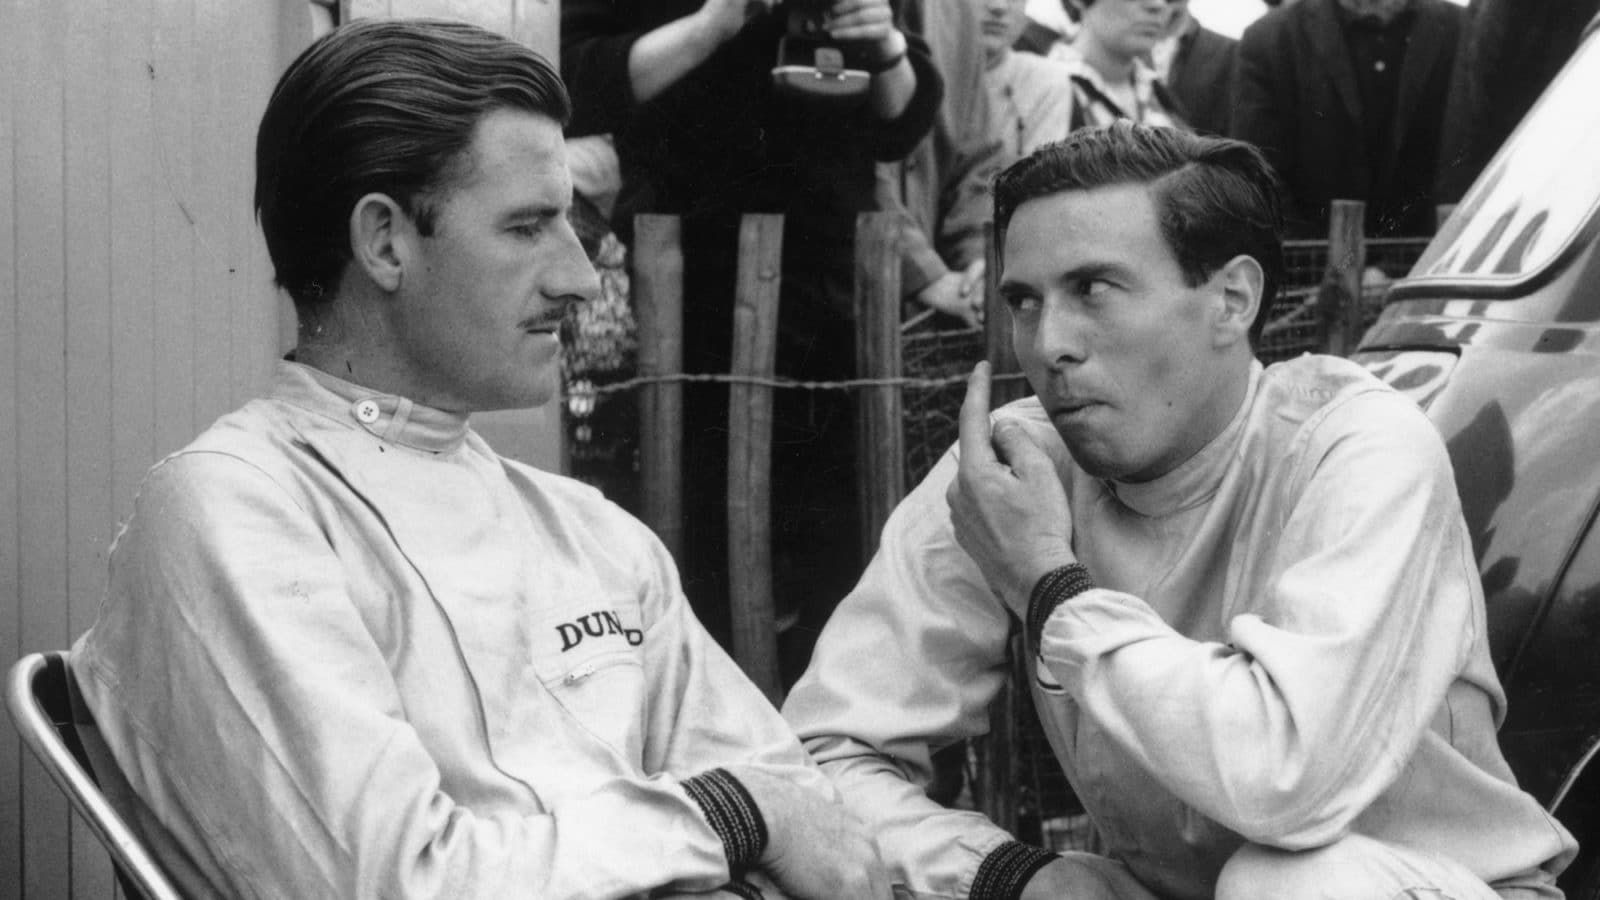 Jim Clark with Graham Hill in 1965